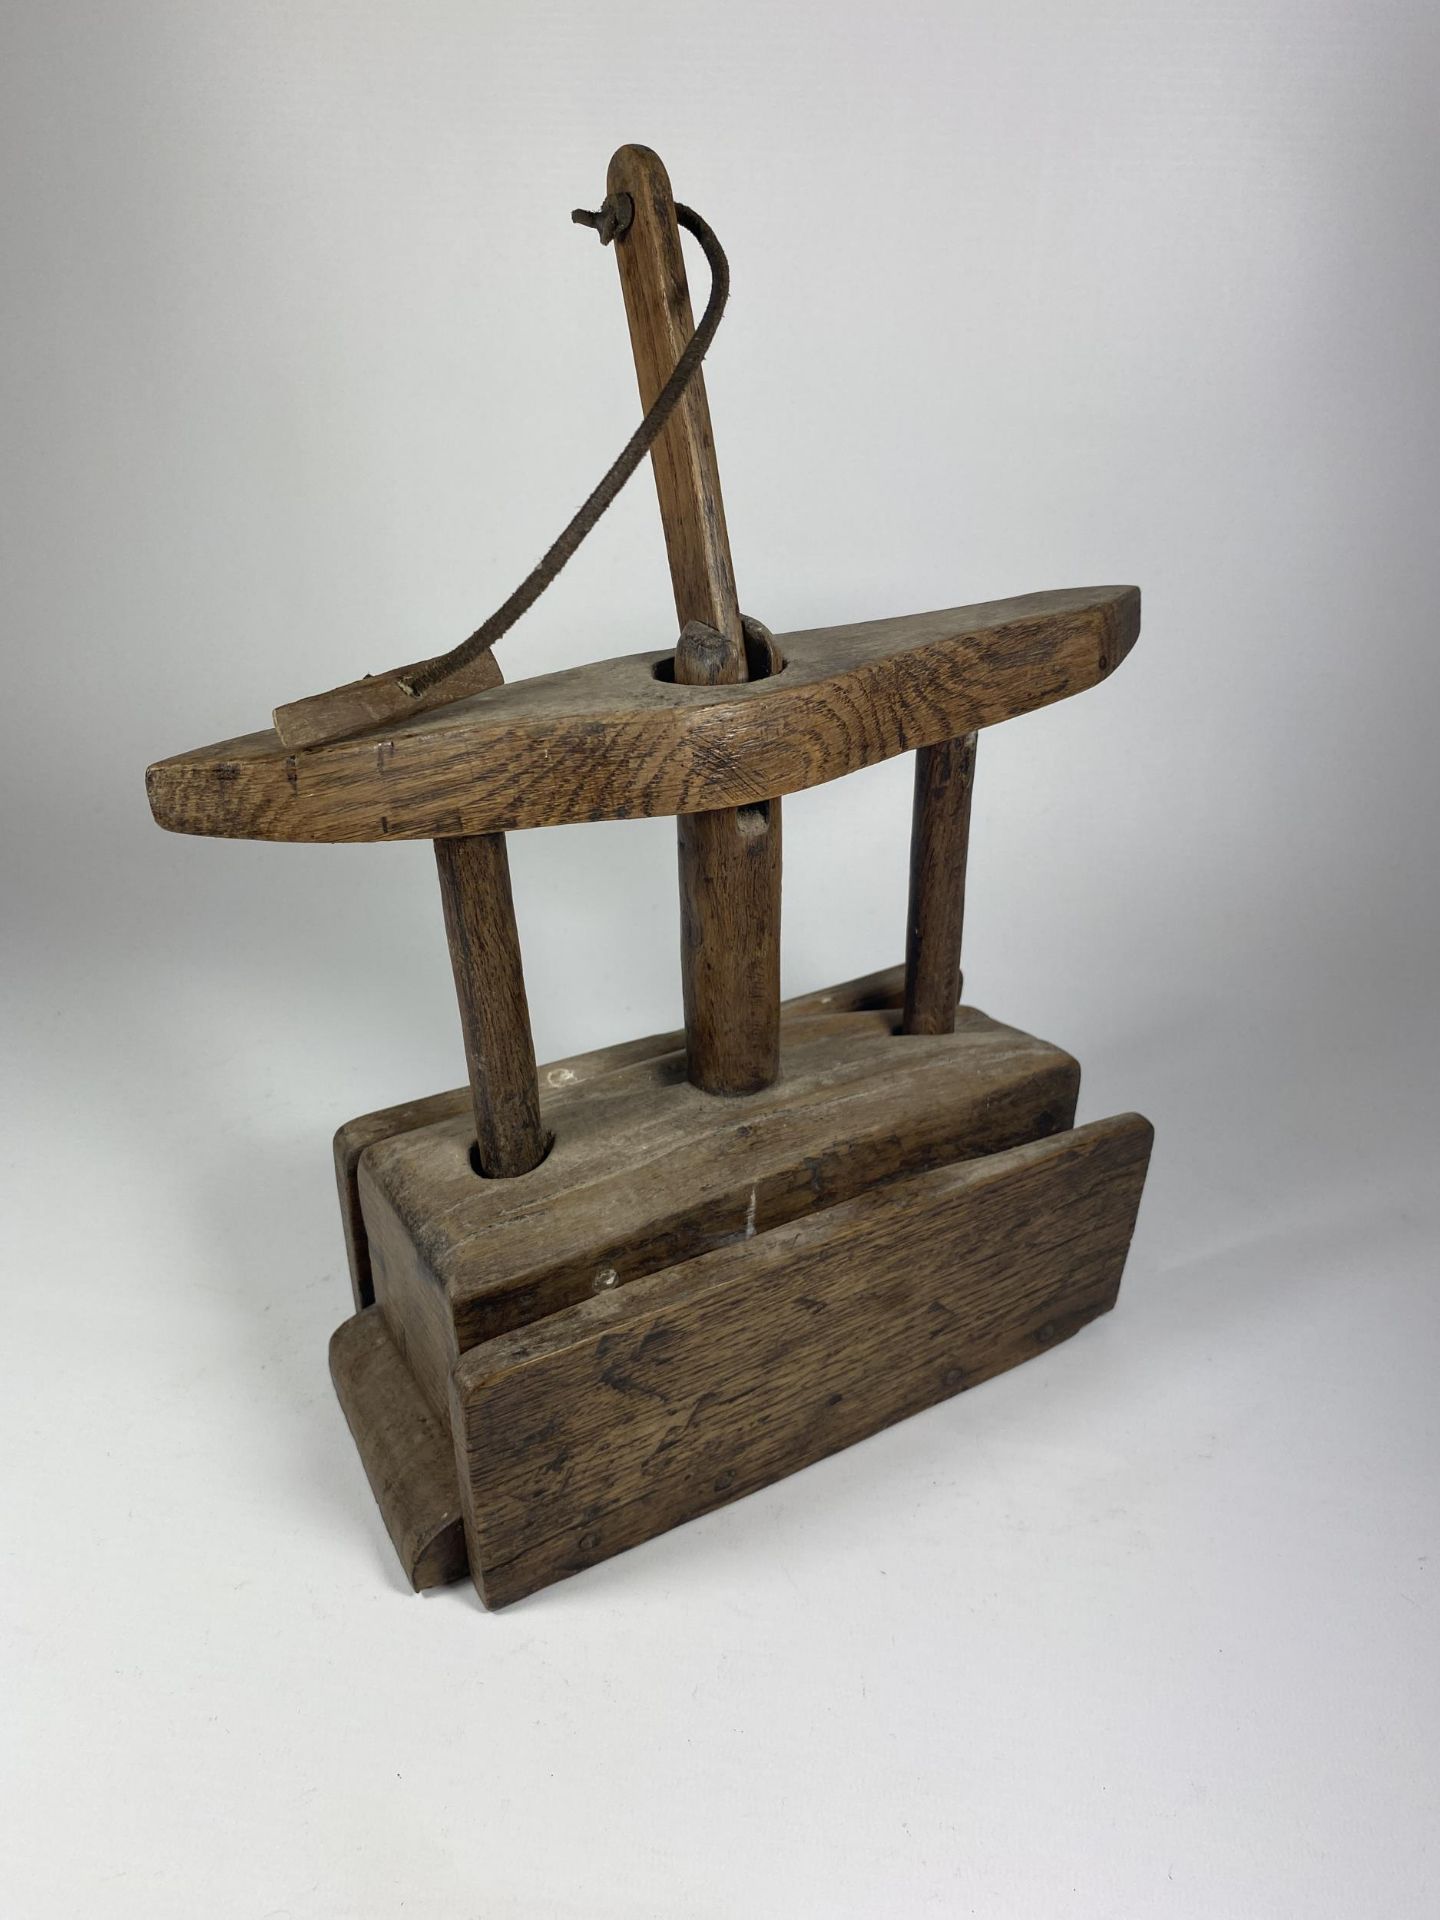 AN UNUSUAL 18TH CENTURY OAK WOODEN MOUSETRAP, HEIGHT 28CM - Image 4 of 4